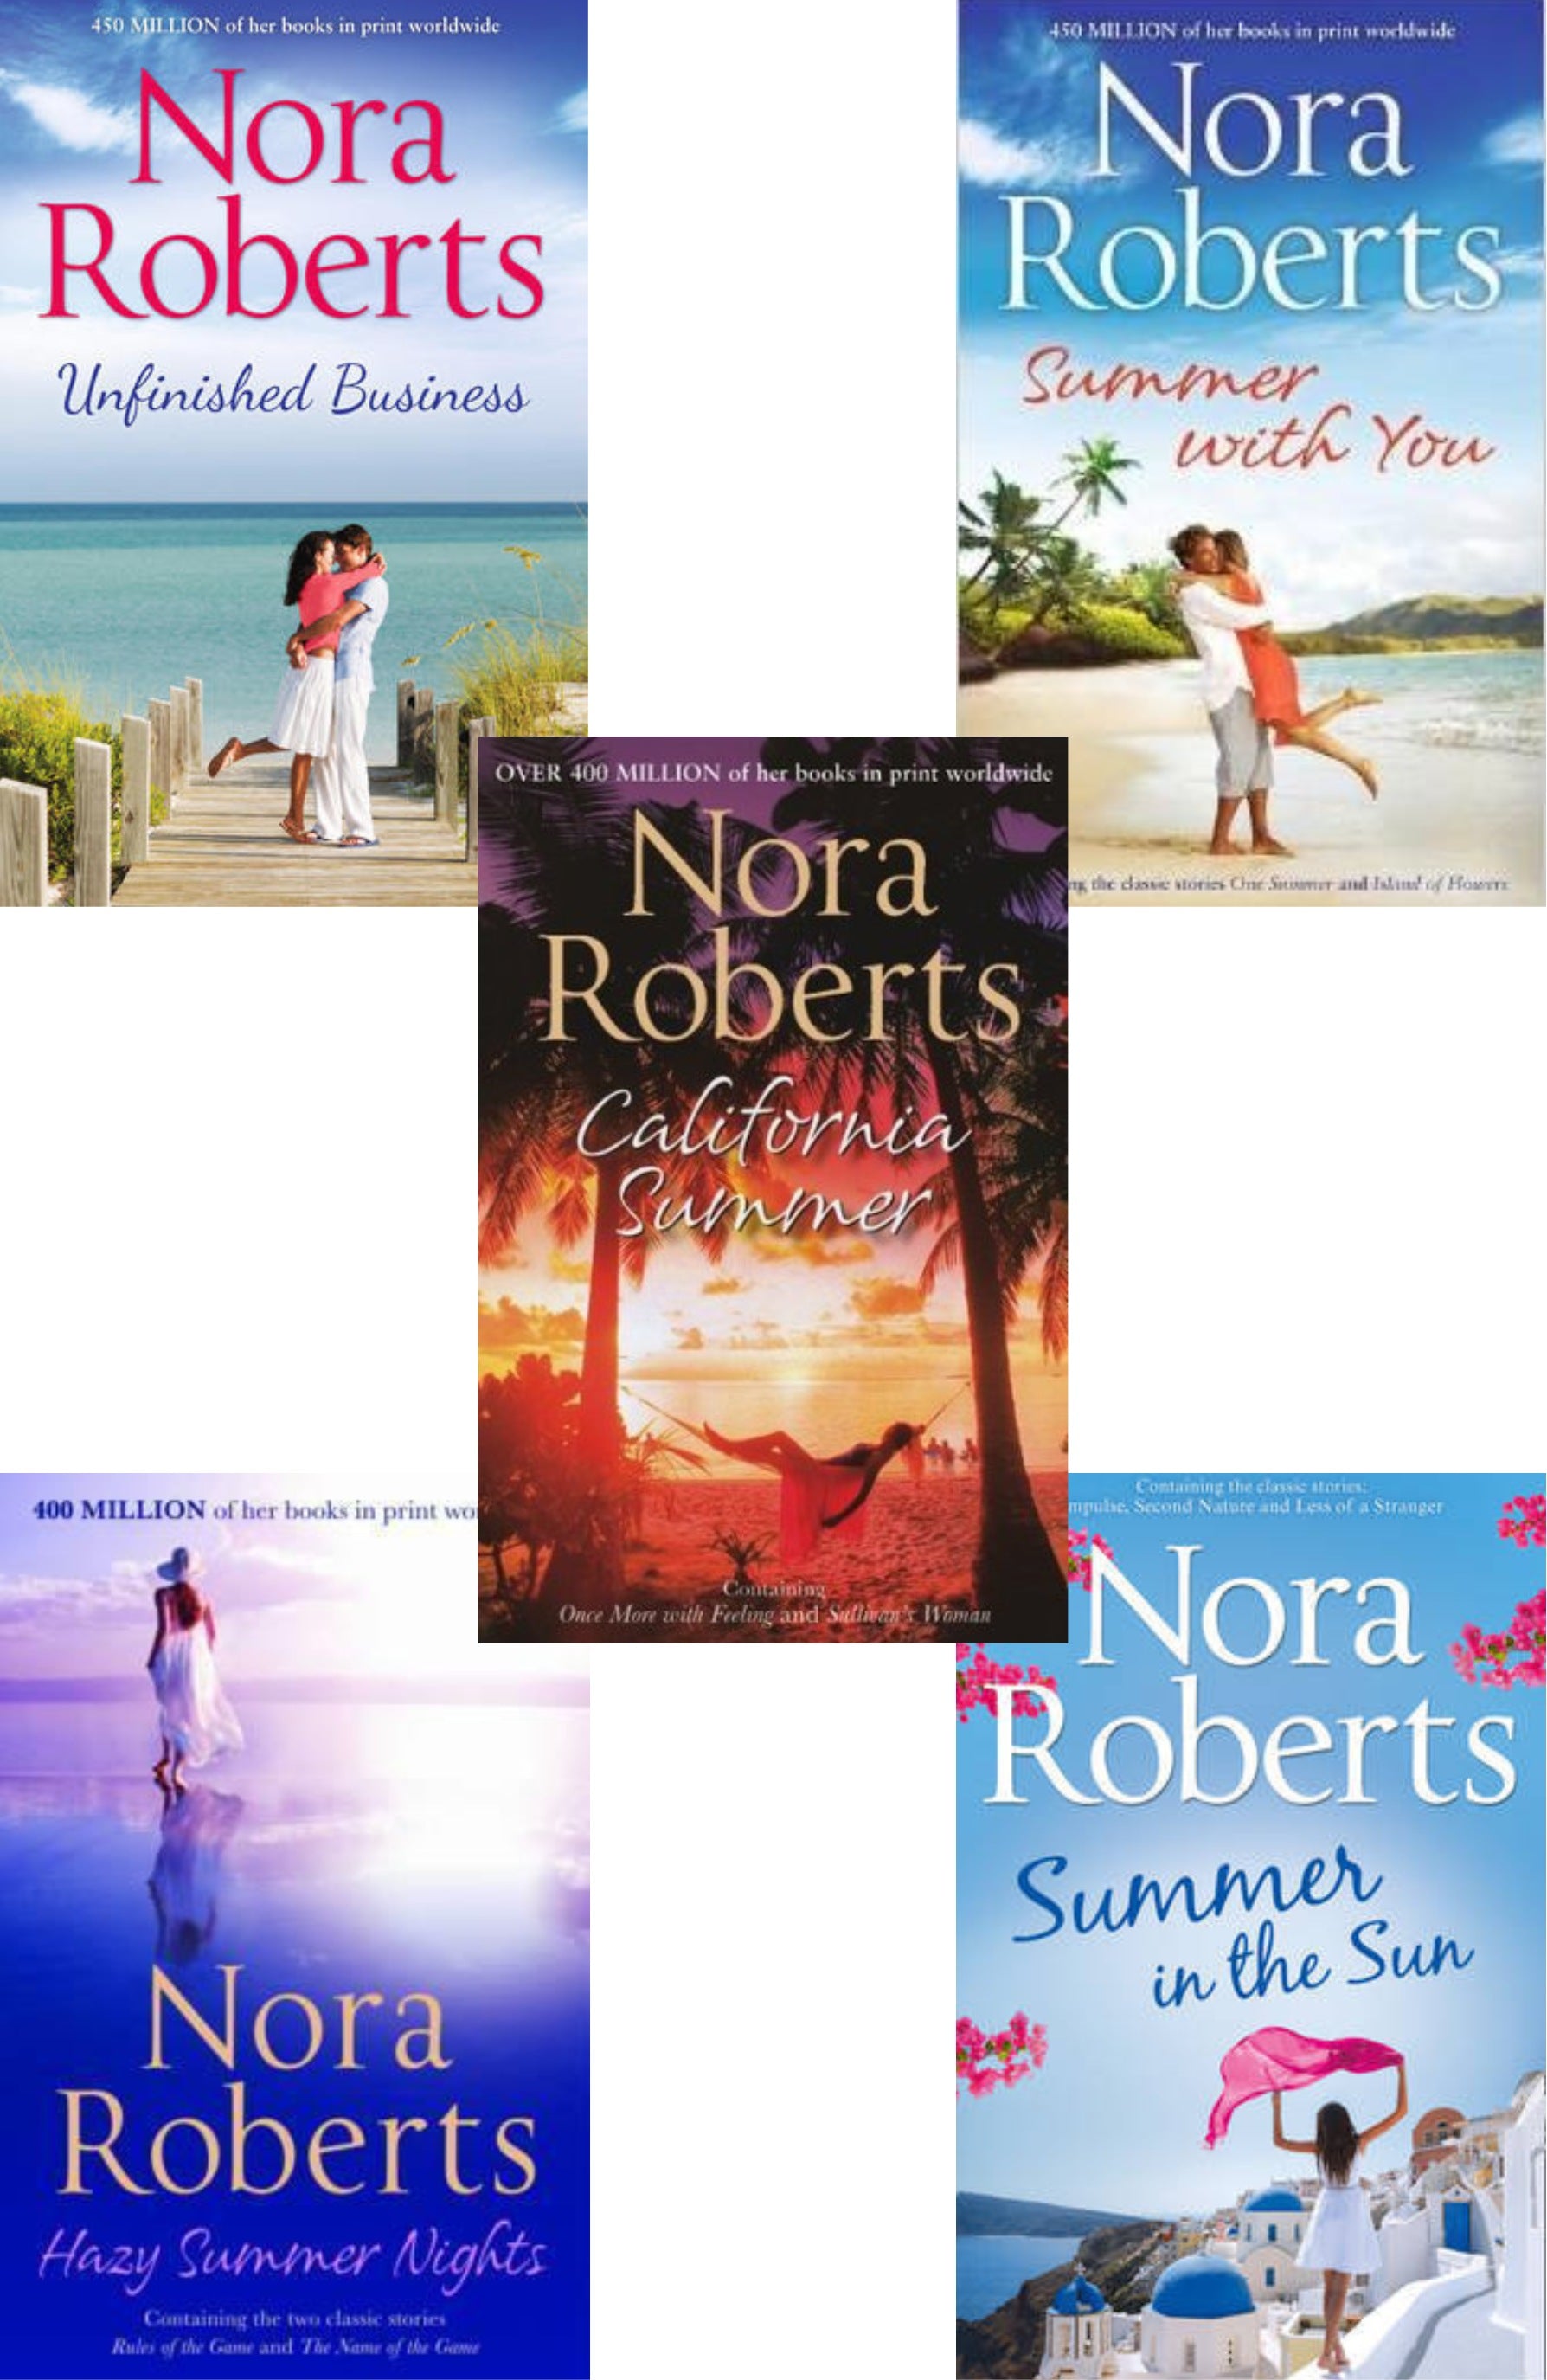 Nora Roberts Romance Bestseller Book Combo ( Unfinished Business, Summer With You, Summer in the sun, California Summer,  Hazy Summer Nights, Irish Rose )